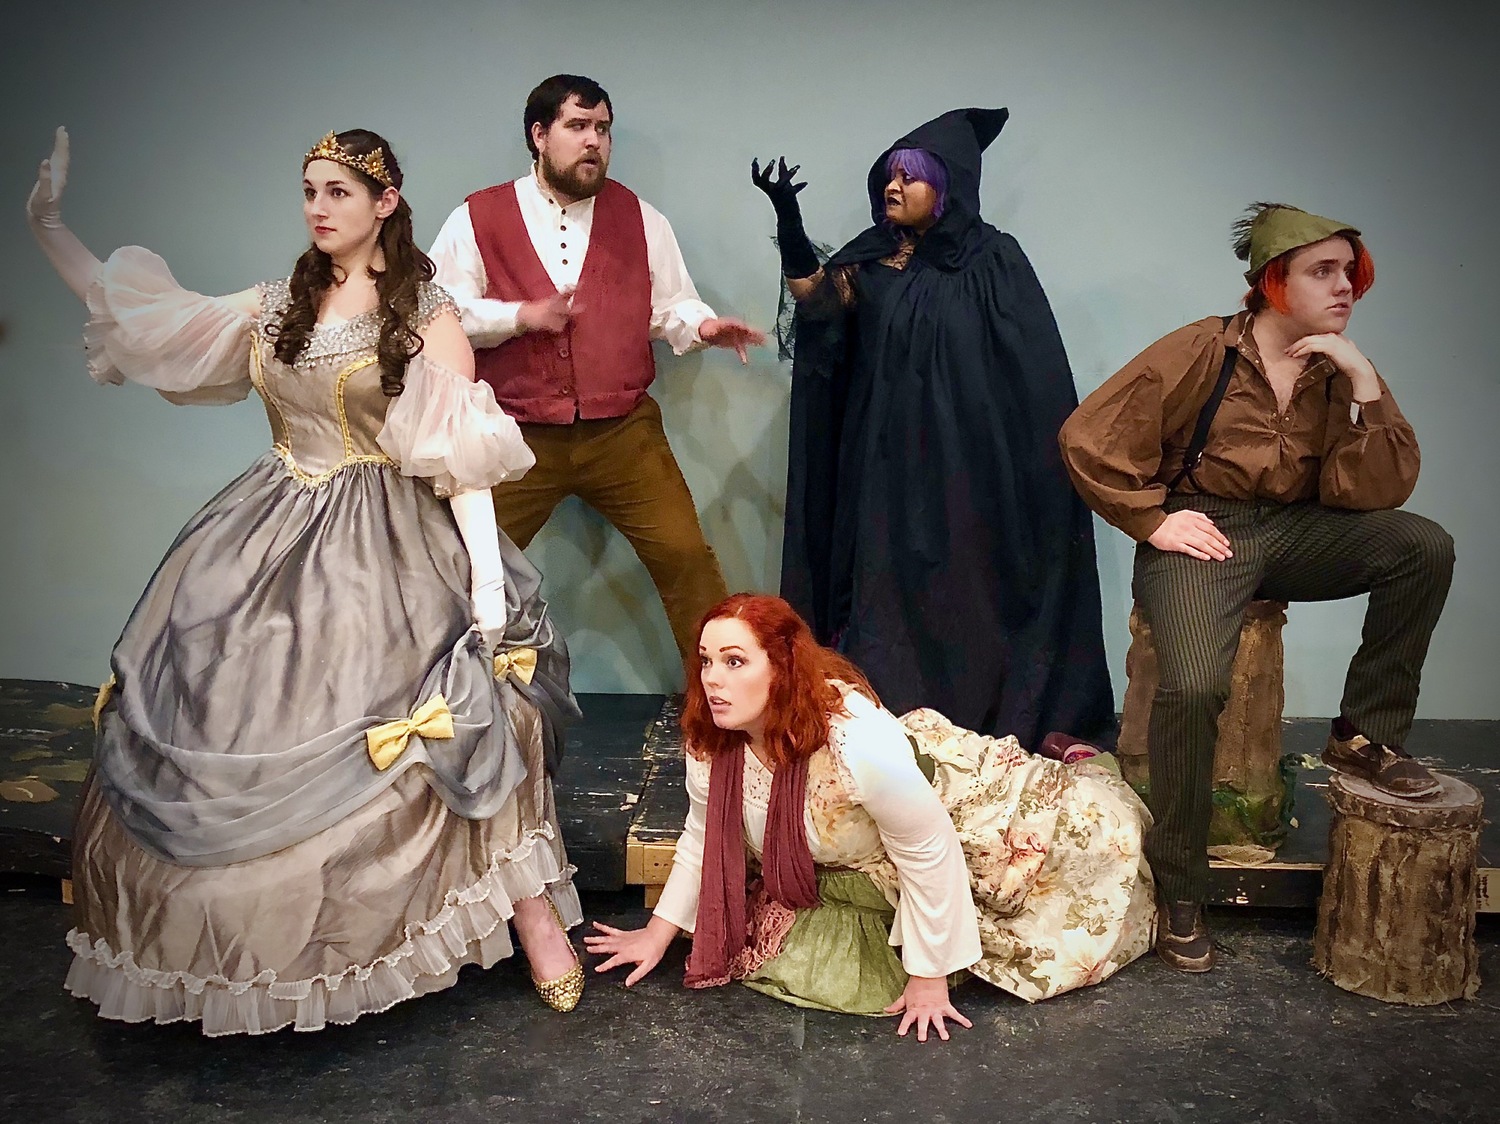 Interview: Director Karen Connor of INTO THE WOODS at Southgate Community Players says It's Funny and Poignant Sondheim Show! 